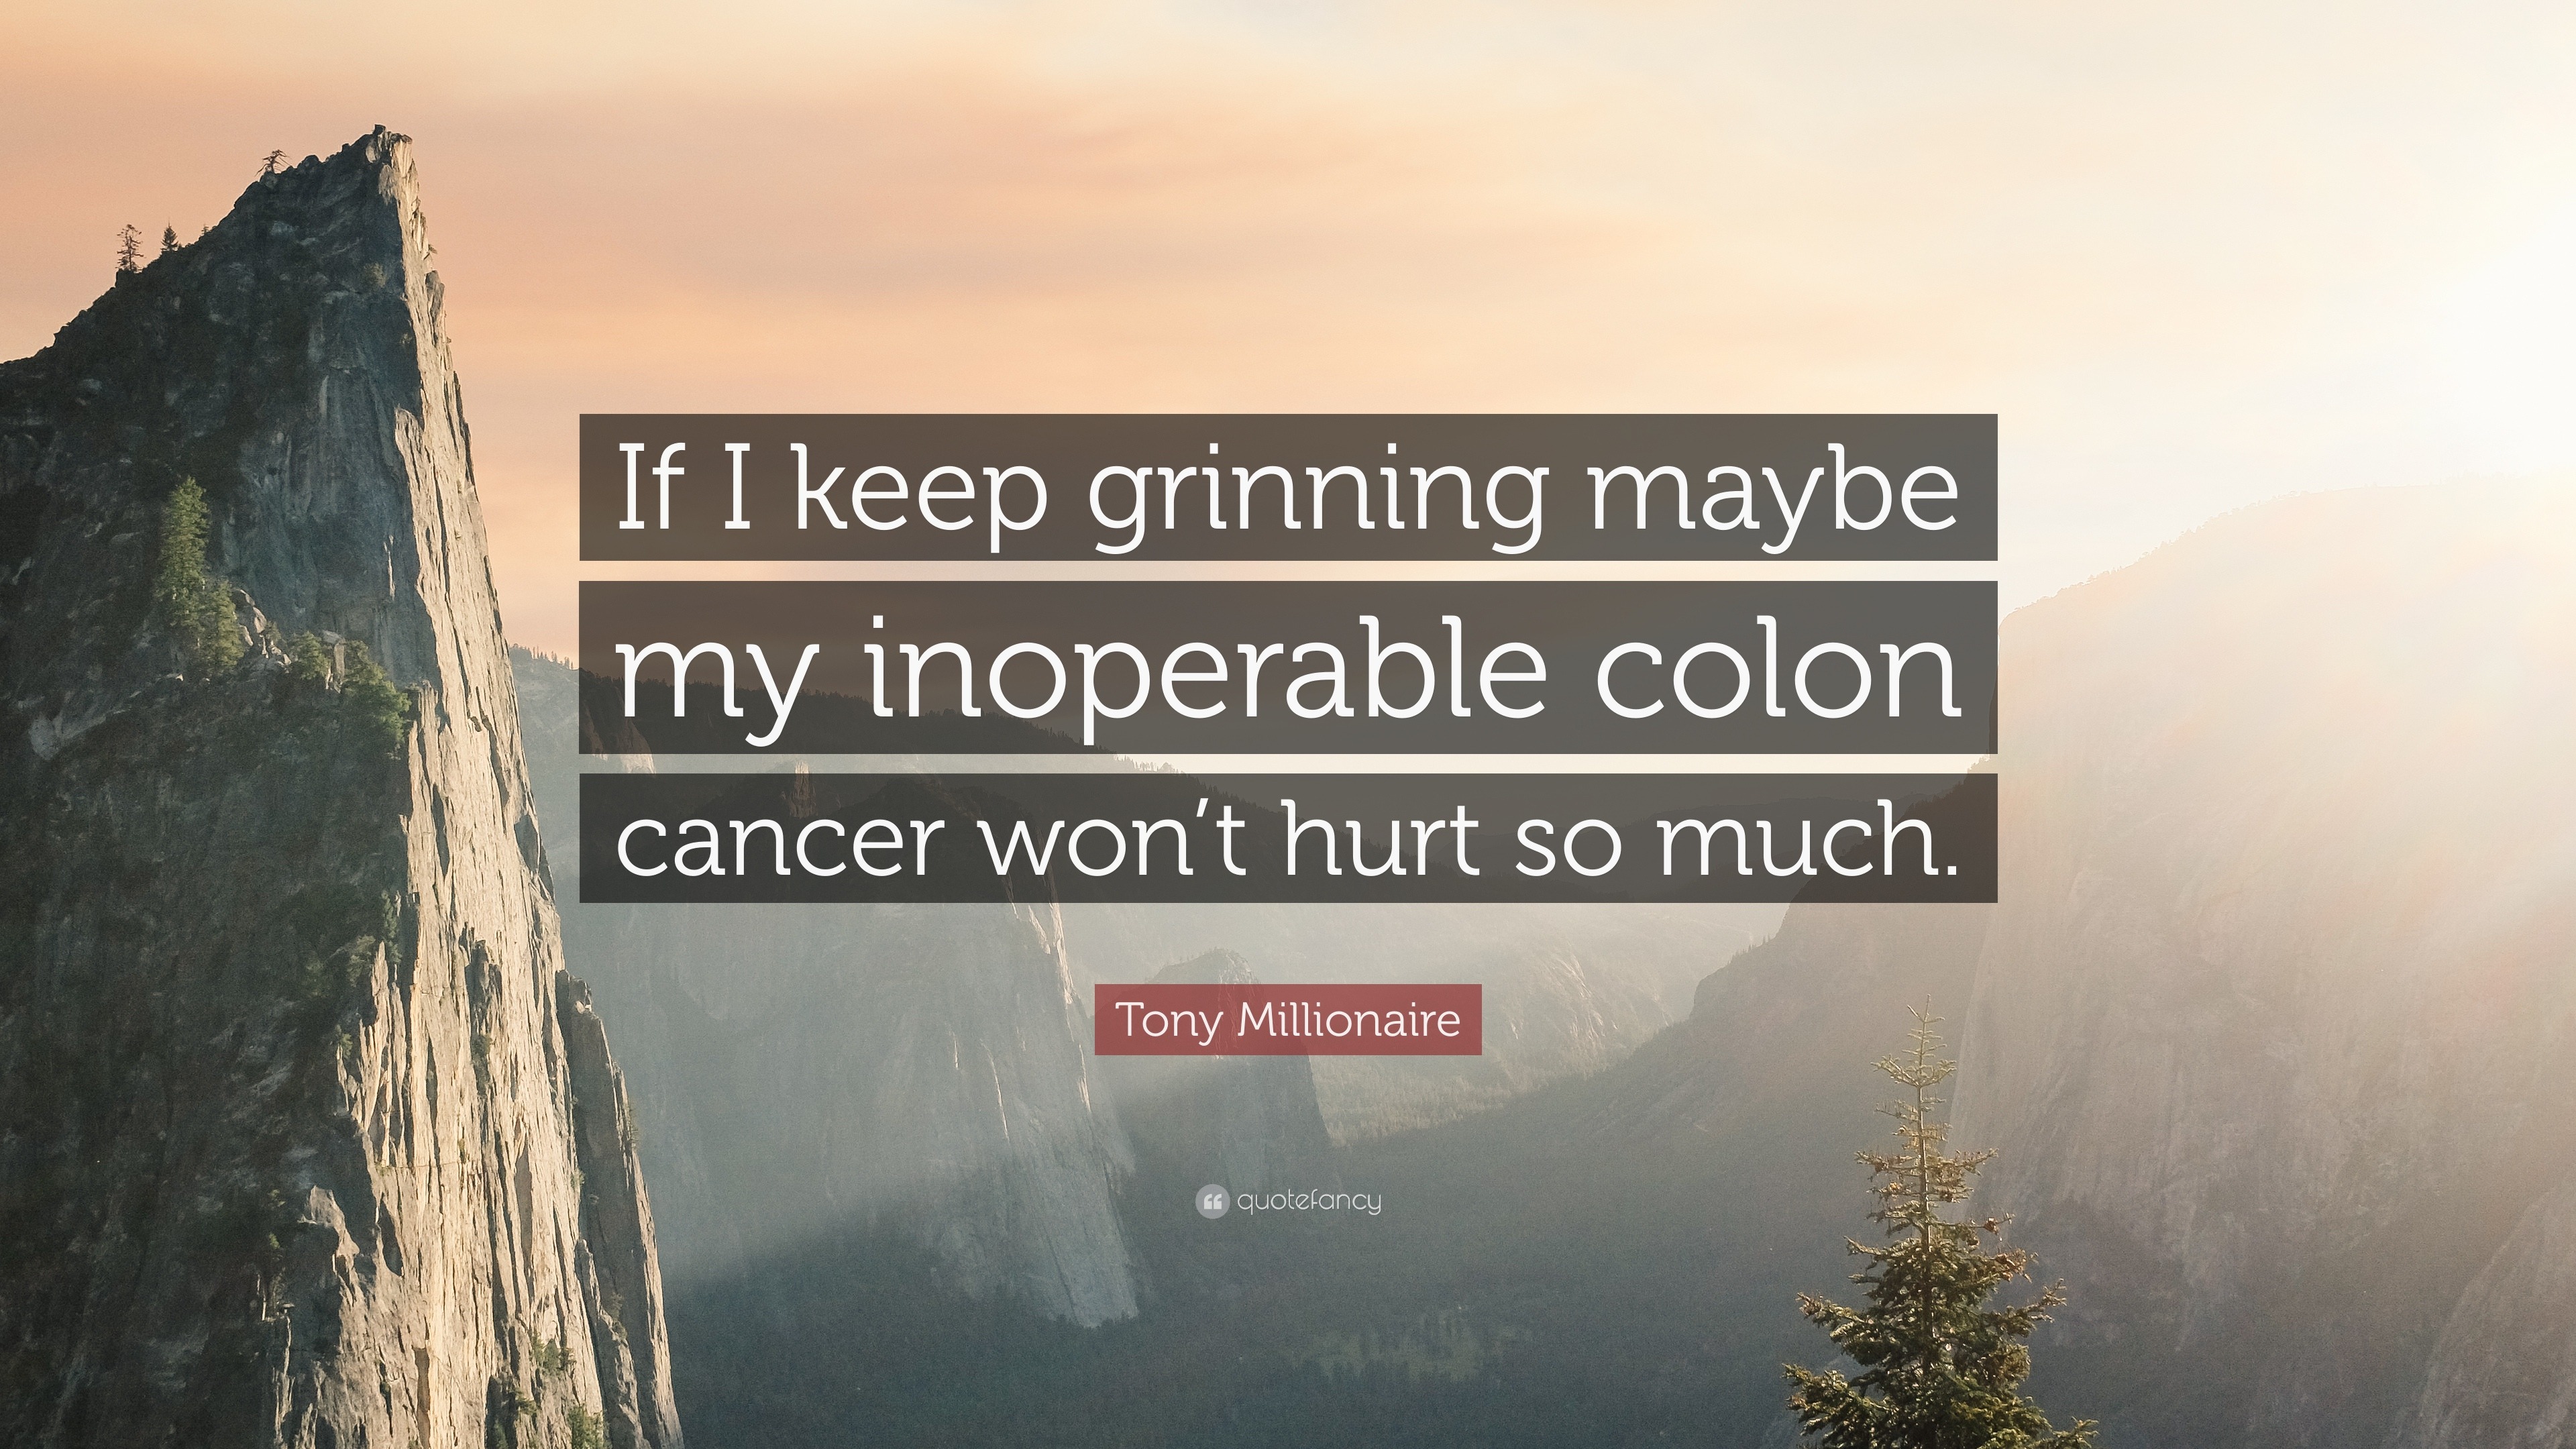 inoperable colon cancer